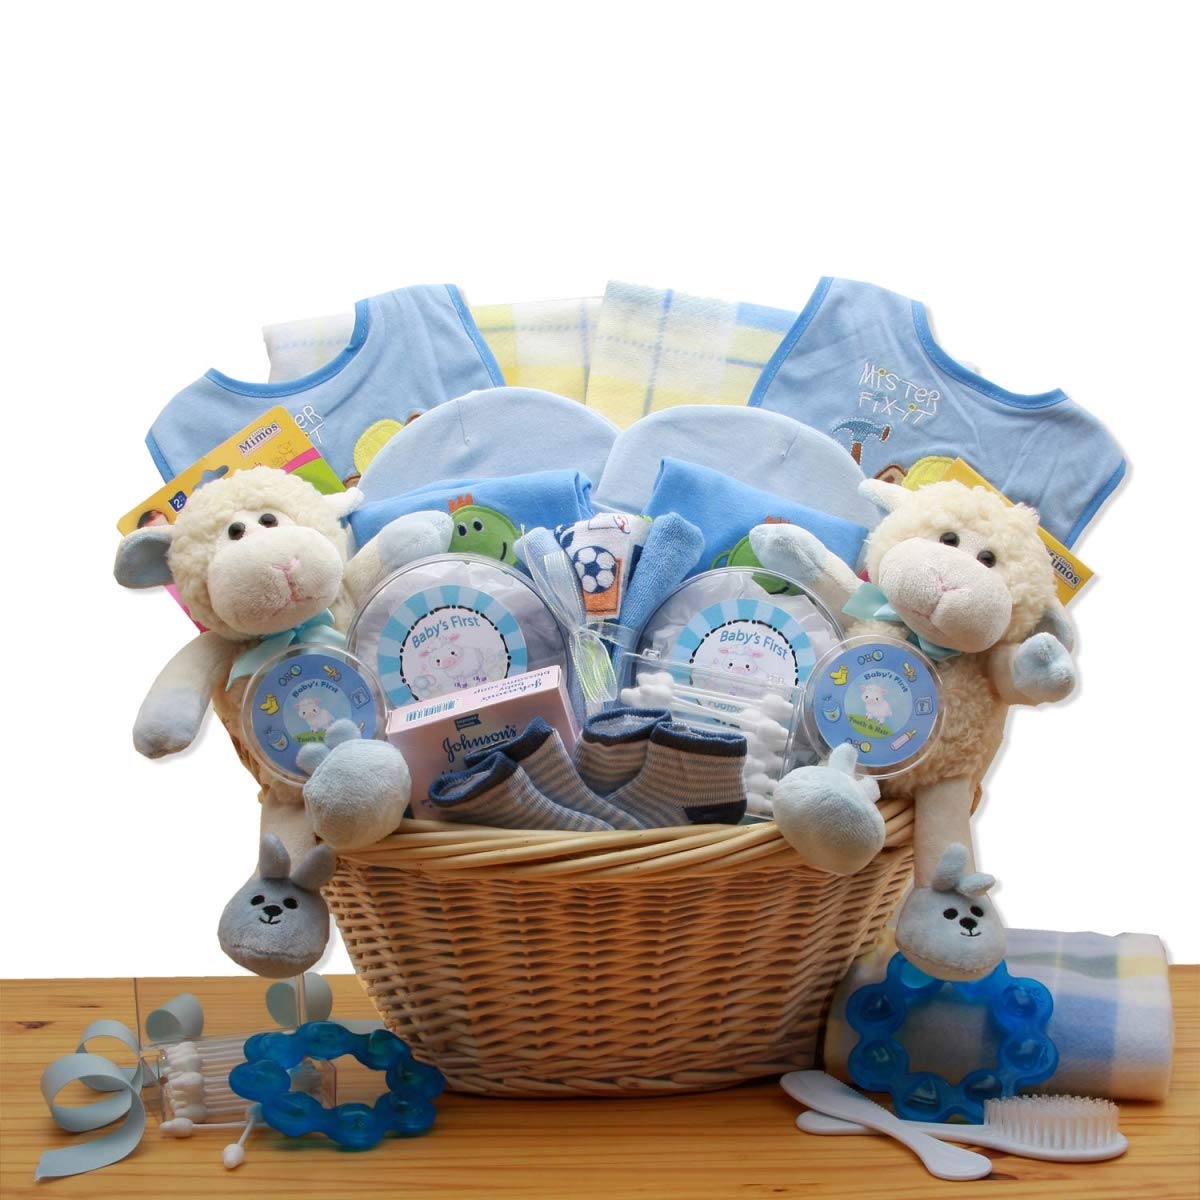 GBDS 890811-B Double Delight Twins New Baby Gift Basket - Blue